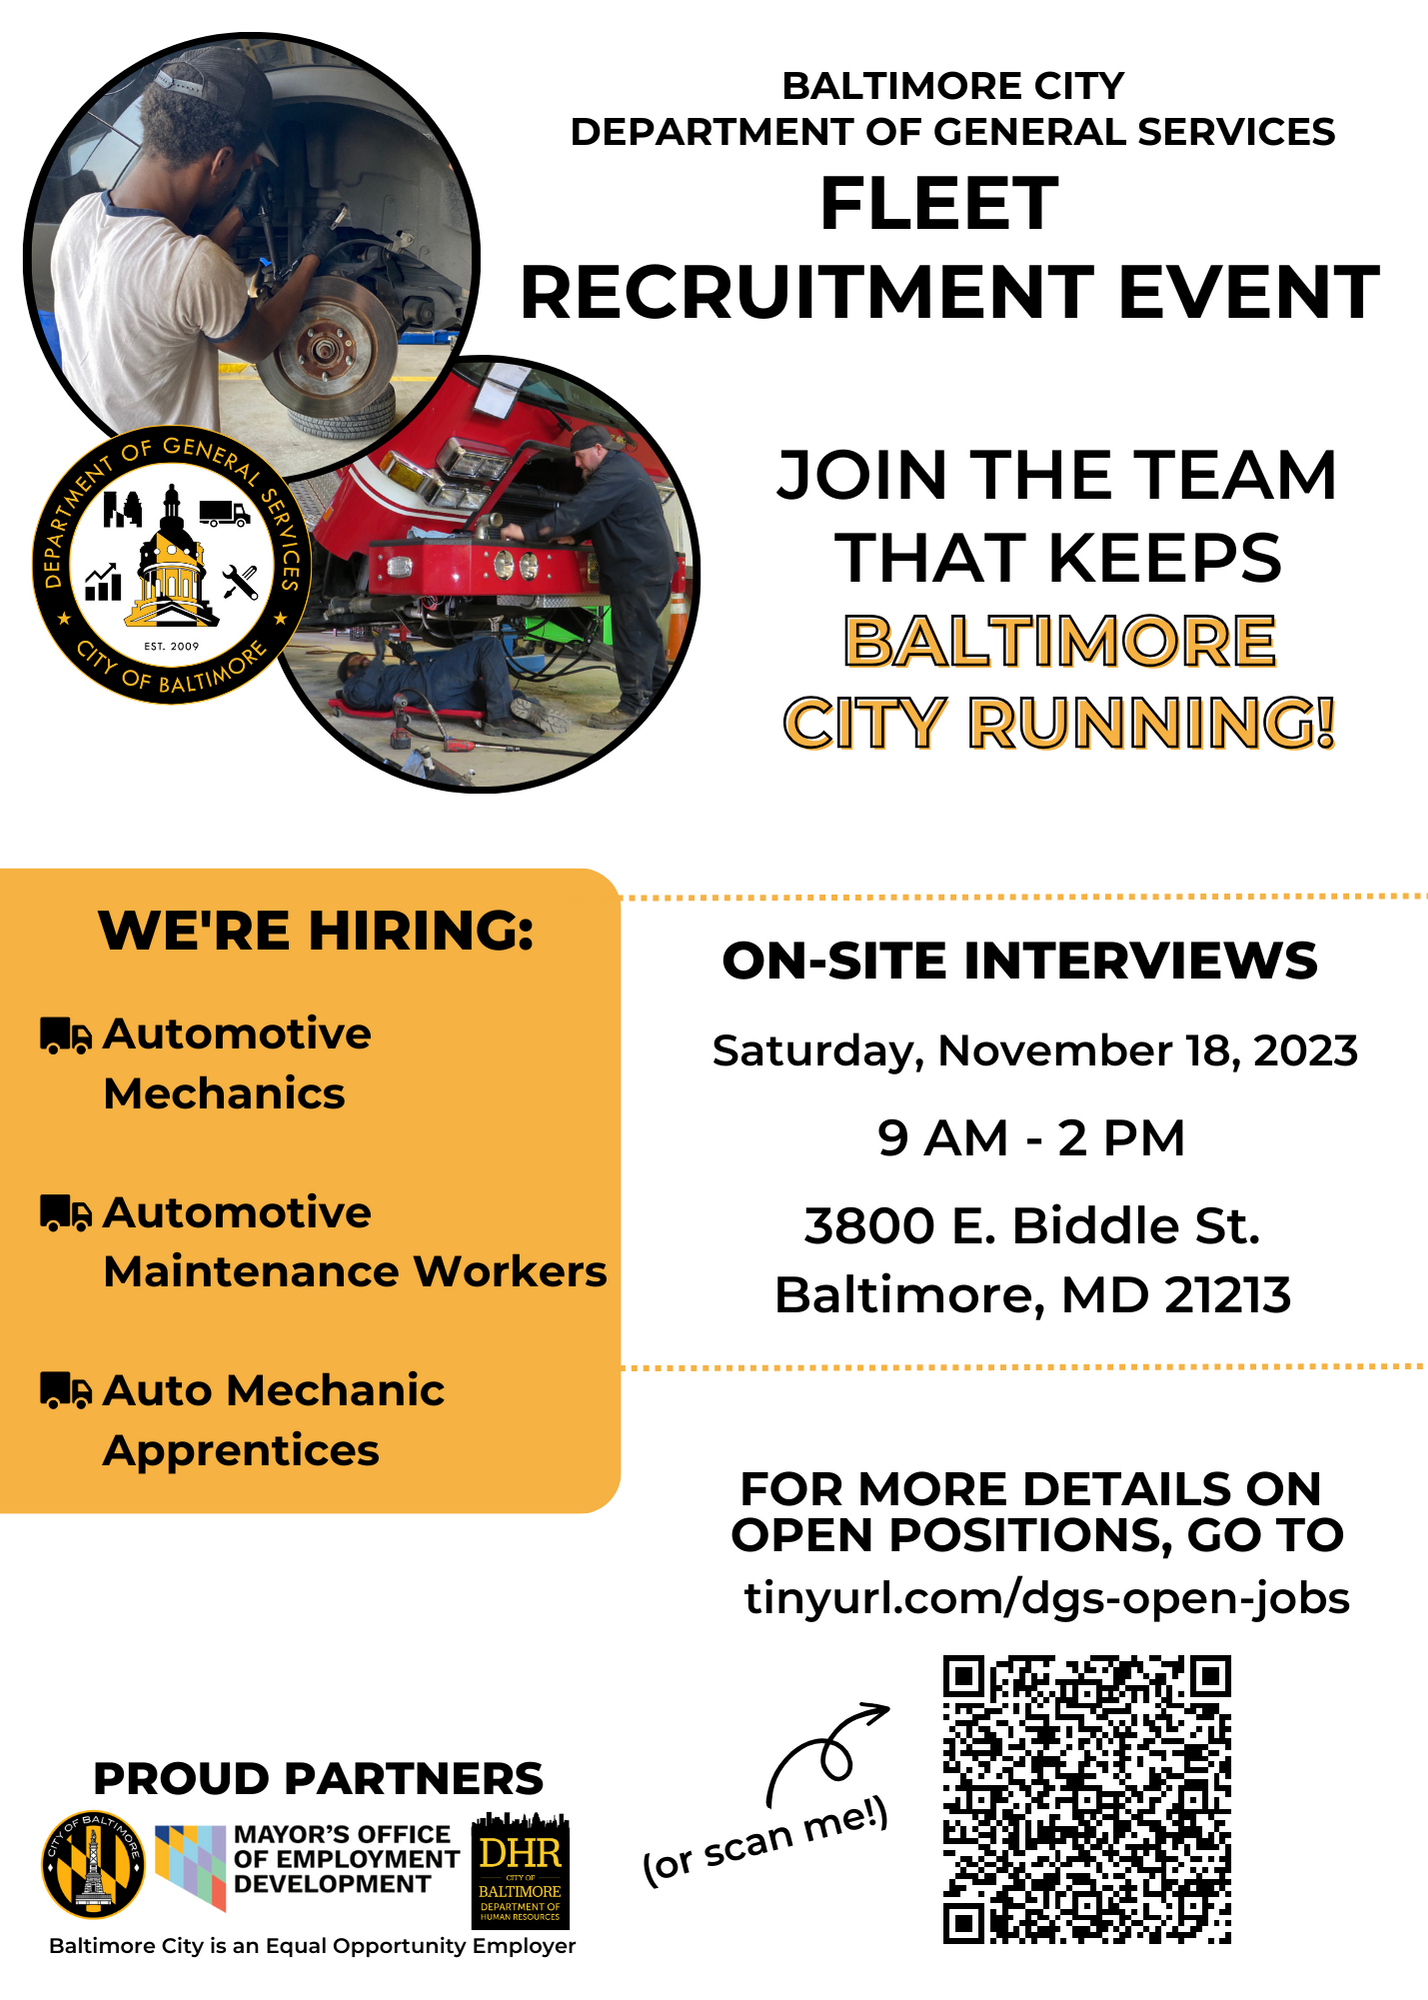 Fleet Recruitment Event, Saturday, November 18th, 9 AM - 2 PM at 3800 E. Biddle St. We're hiring Auto Mechanics, Apprentices, and Auto Maintenance Workers